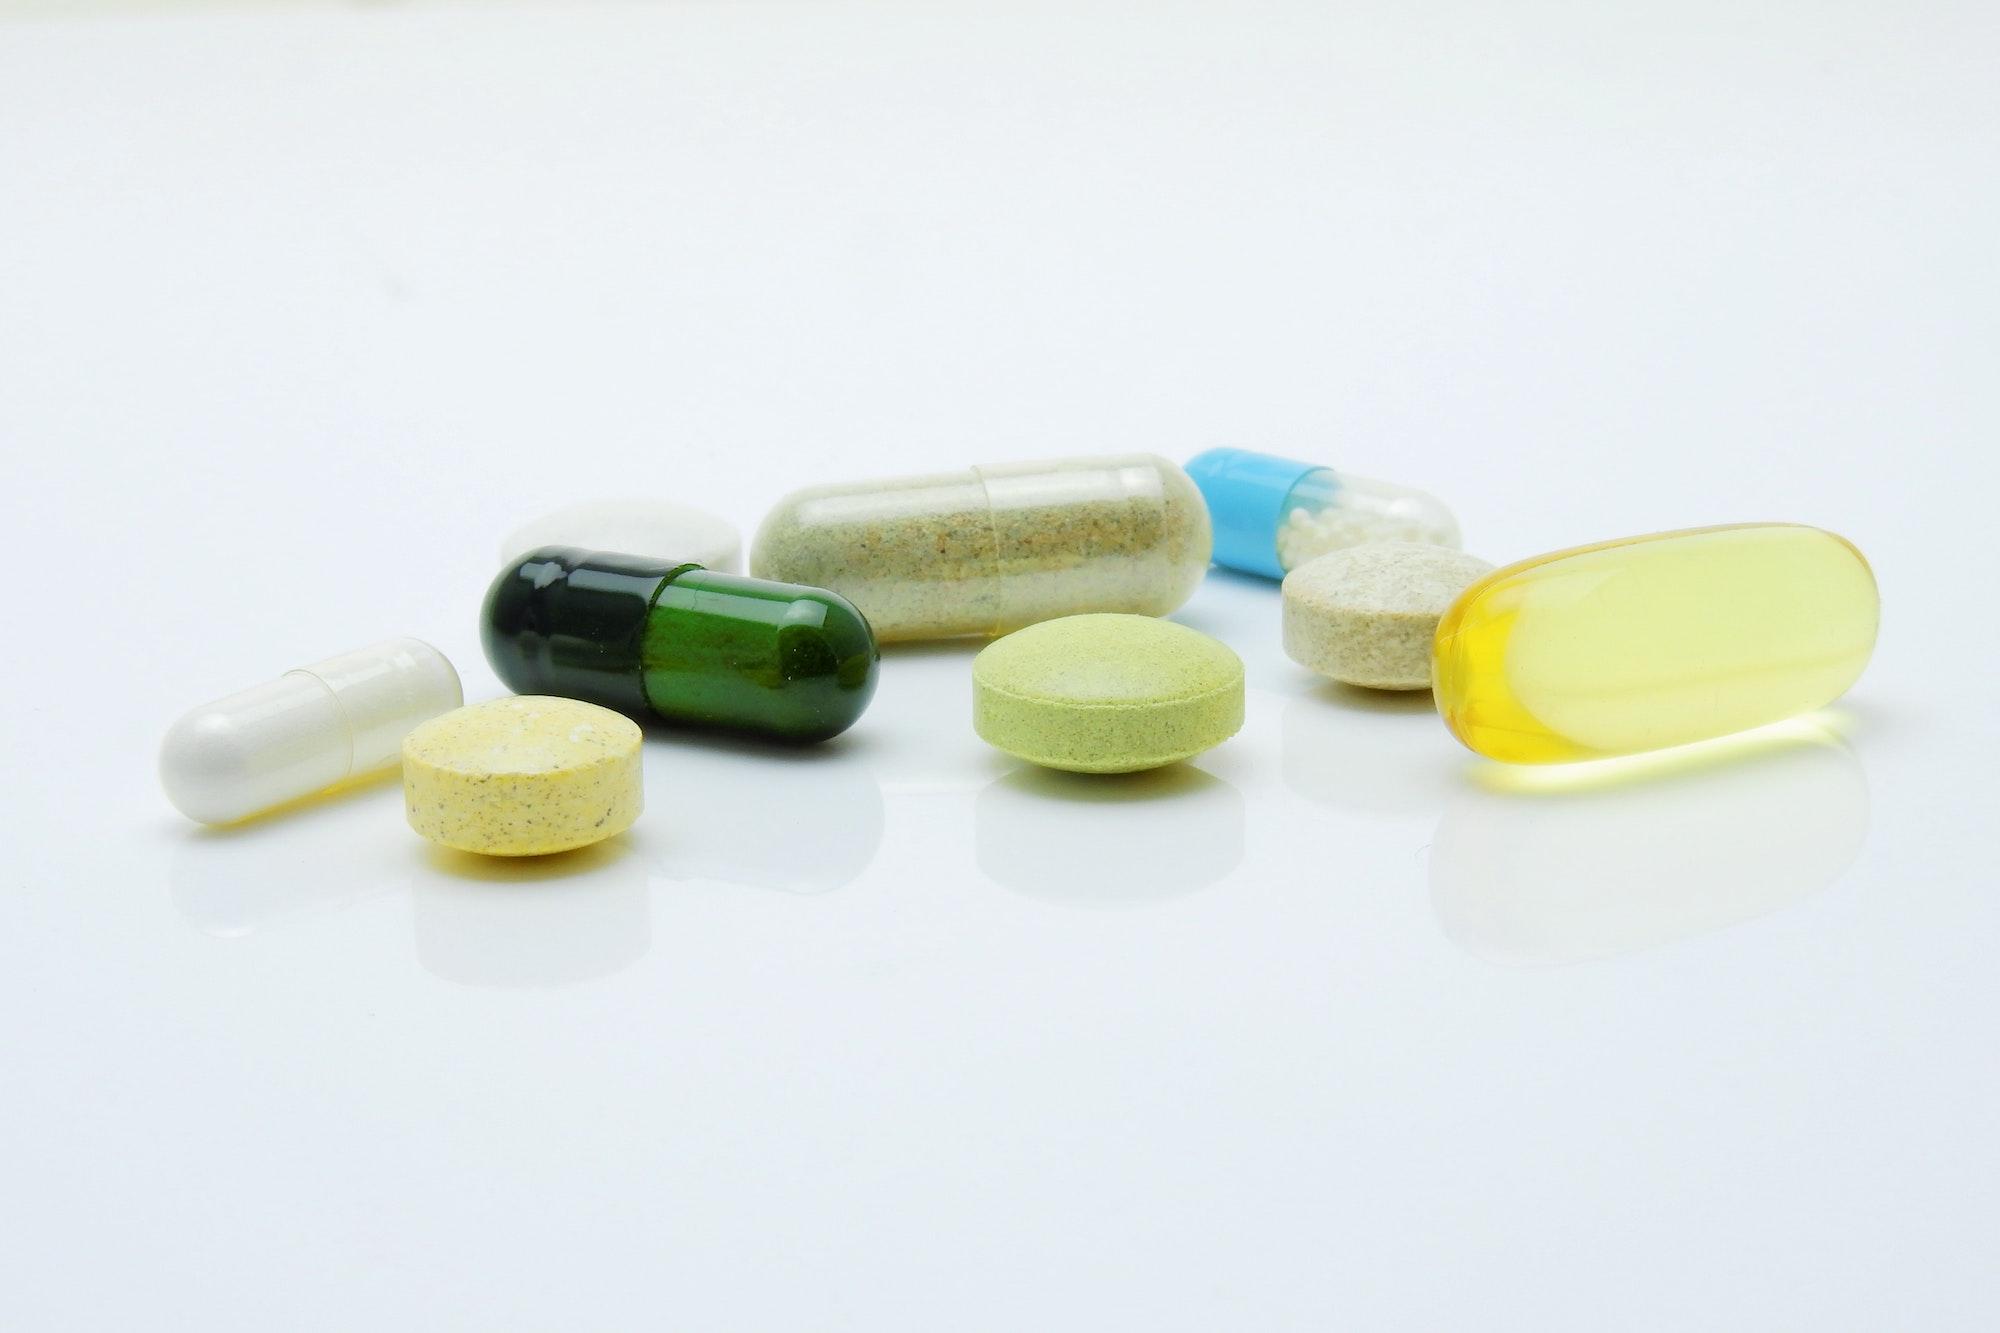 Why do we seem negative about psychiatric medications? Featured Image